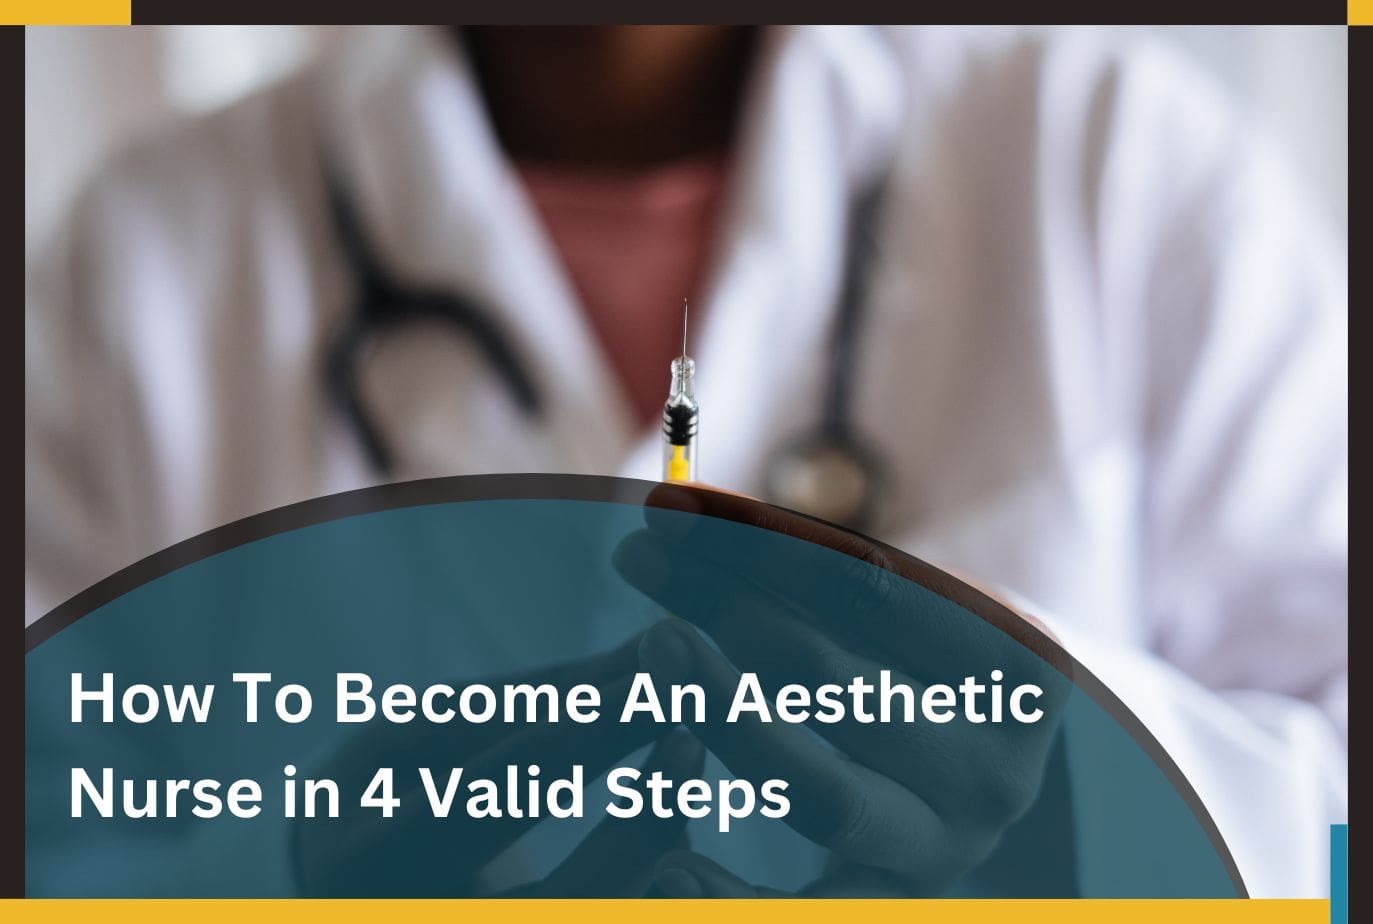 How To Become An Aesthetic Nurse in 4 Valid Steps